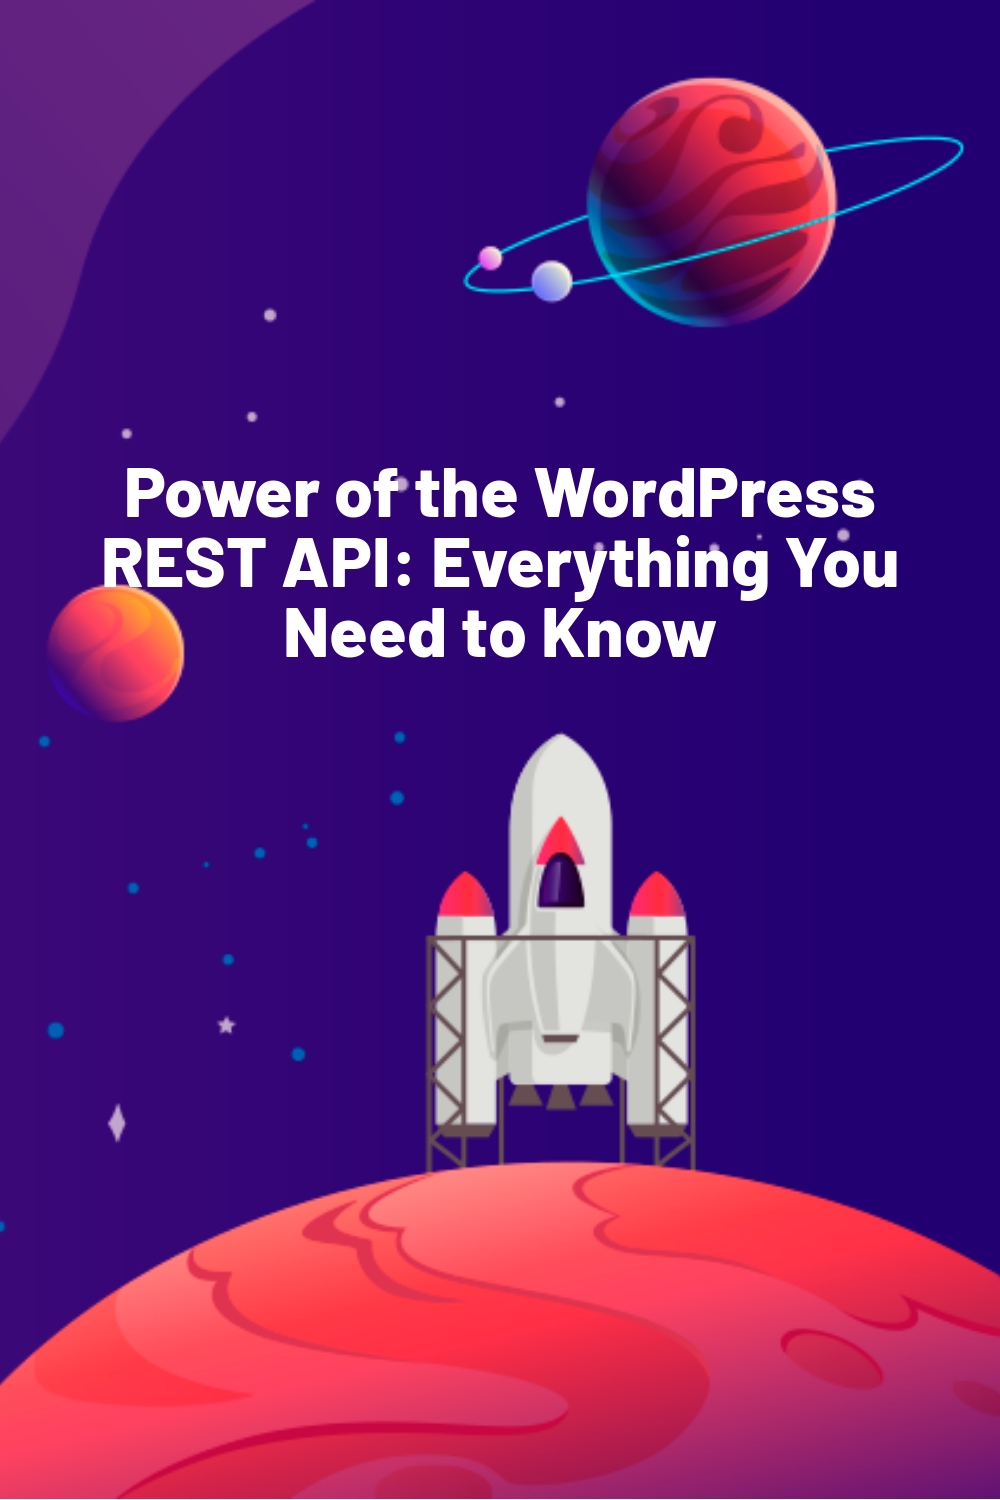 Power of the WordPress REST API: Everything You Need to Know